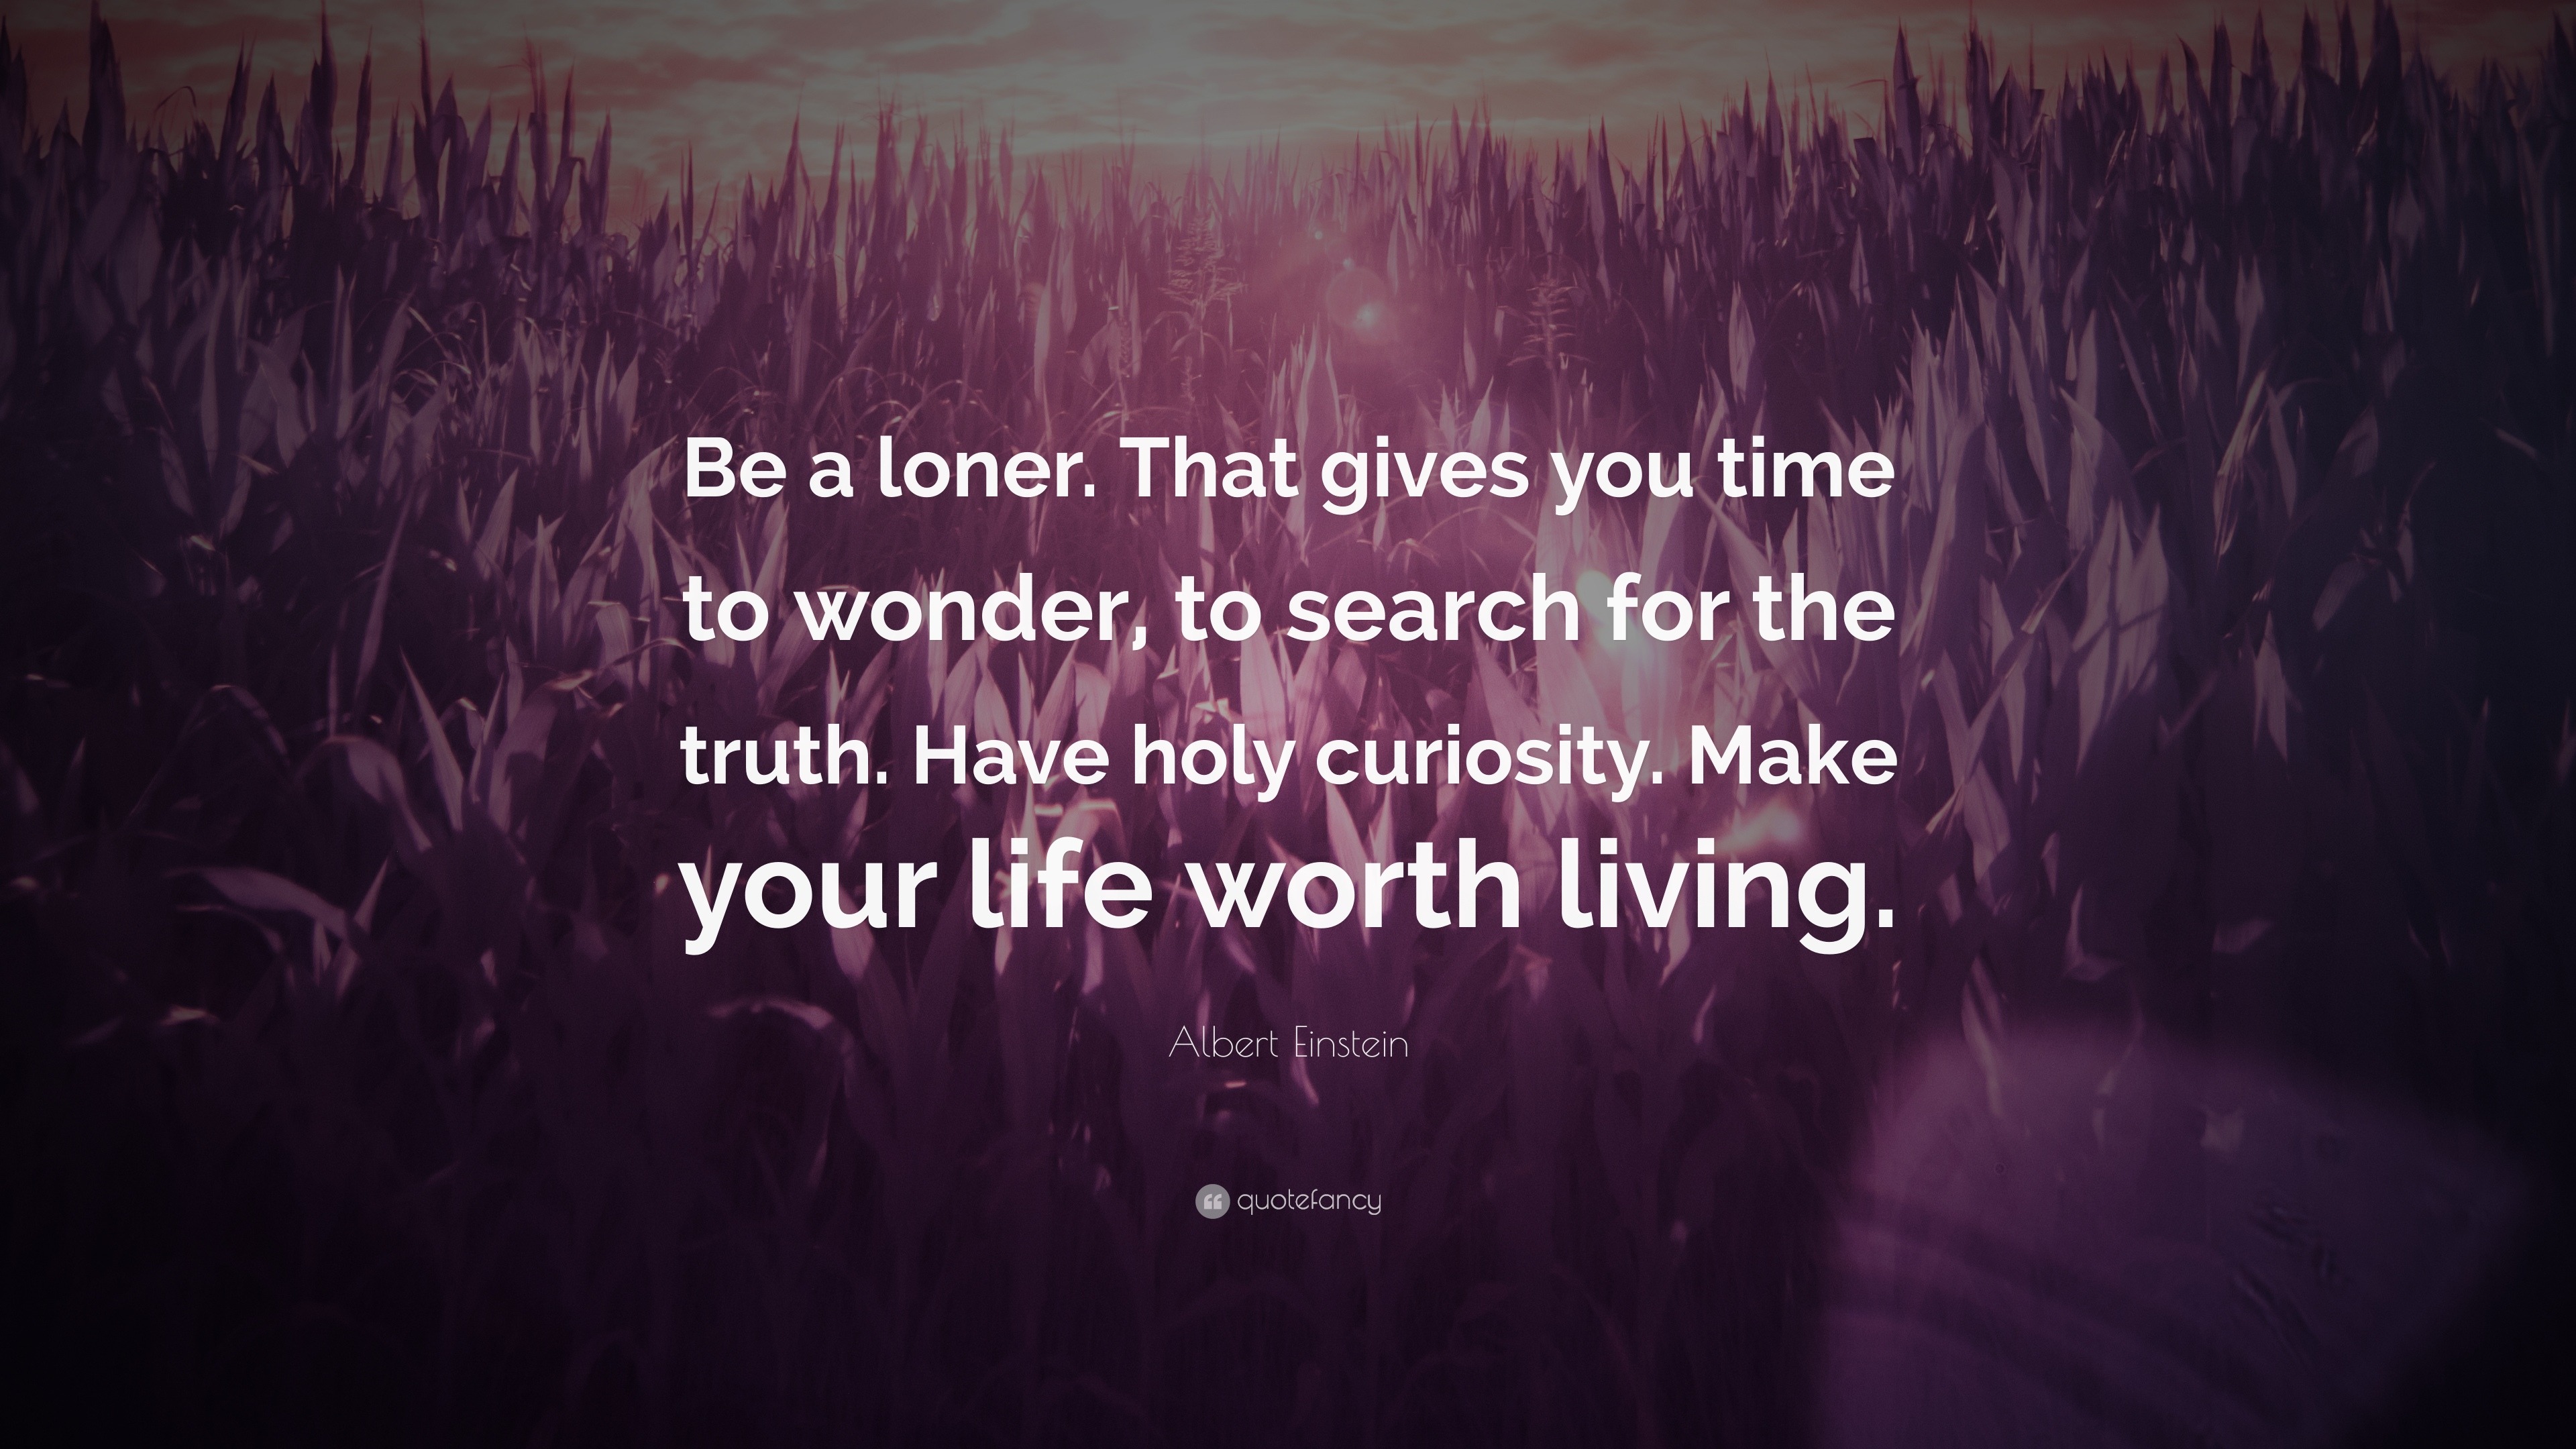 Albert Einstein Quote “Be a loner That gives you time to wonder